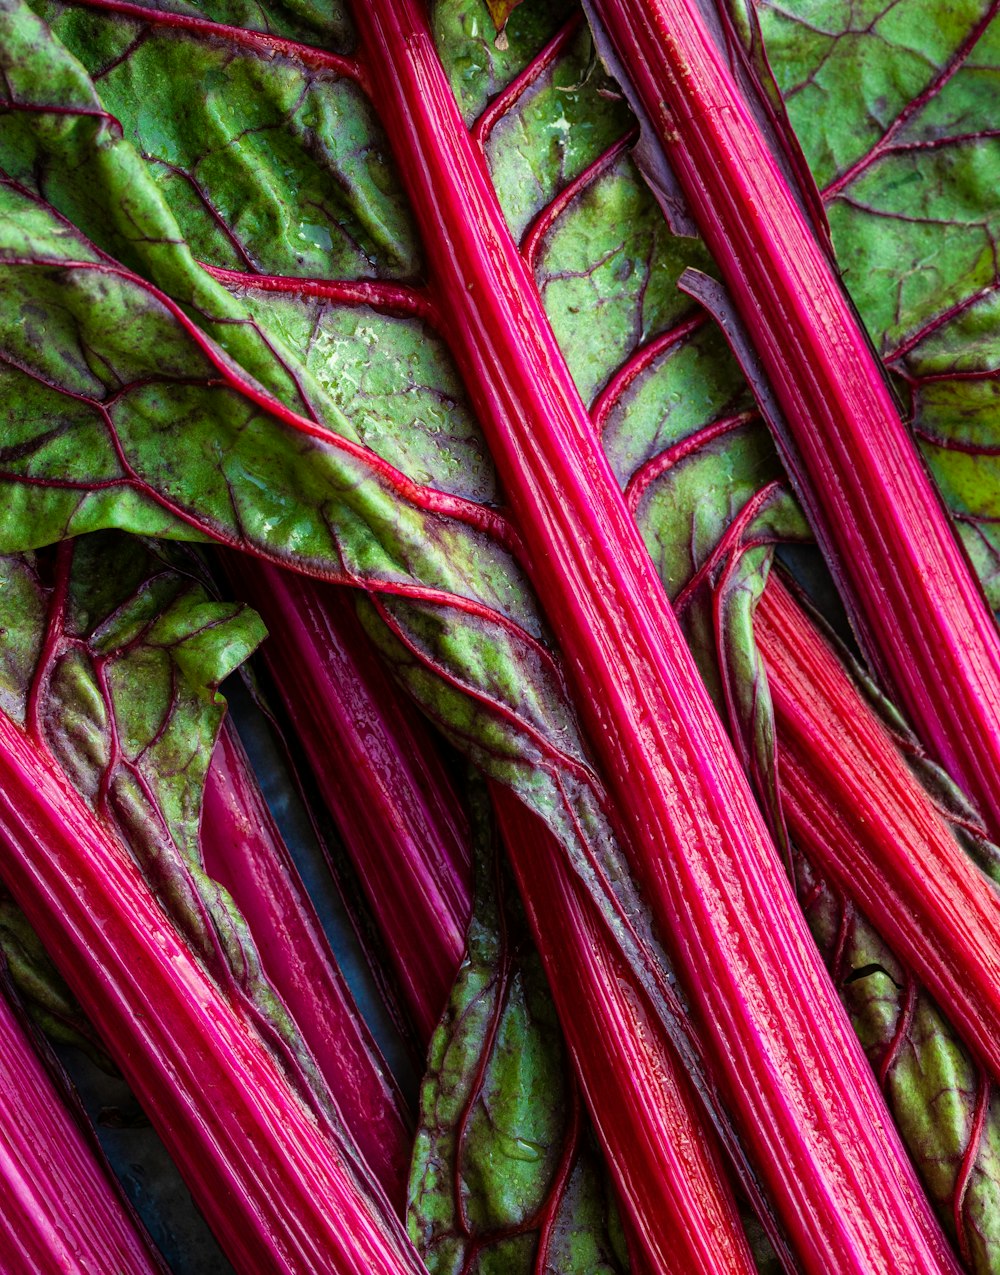 a close up of a bunch of red and green vegetables